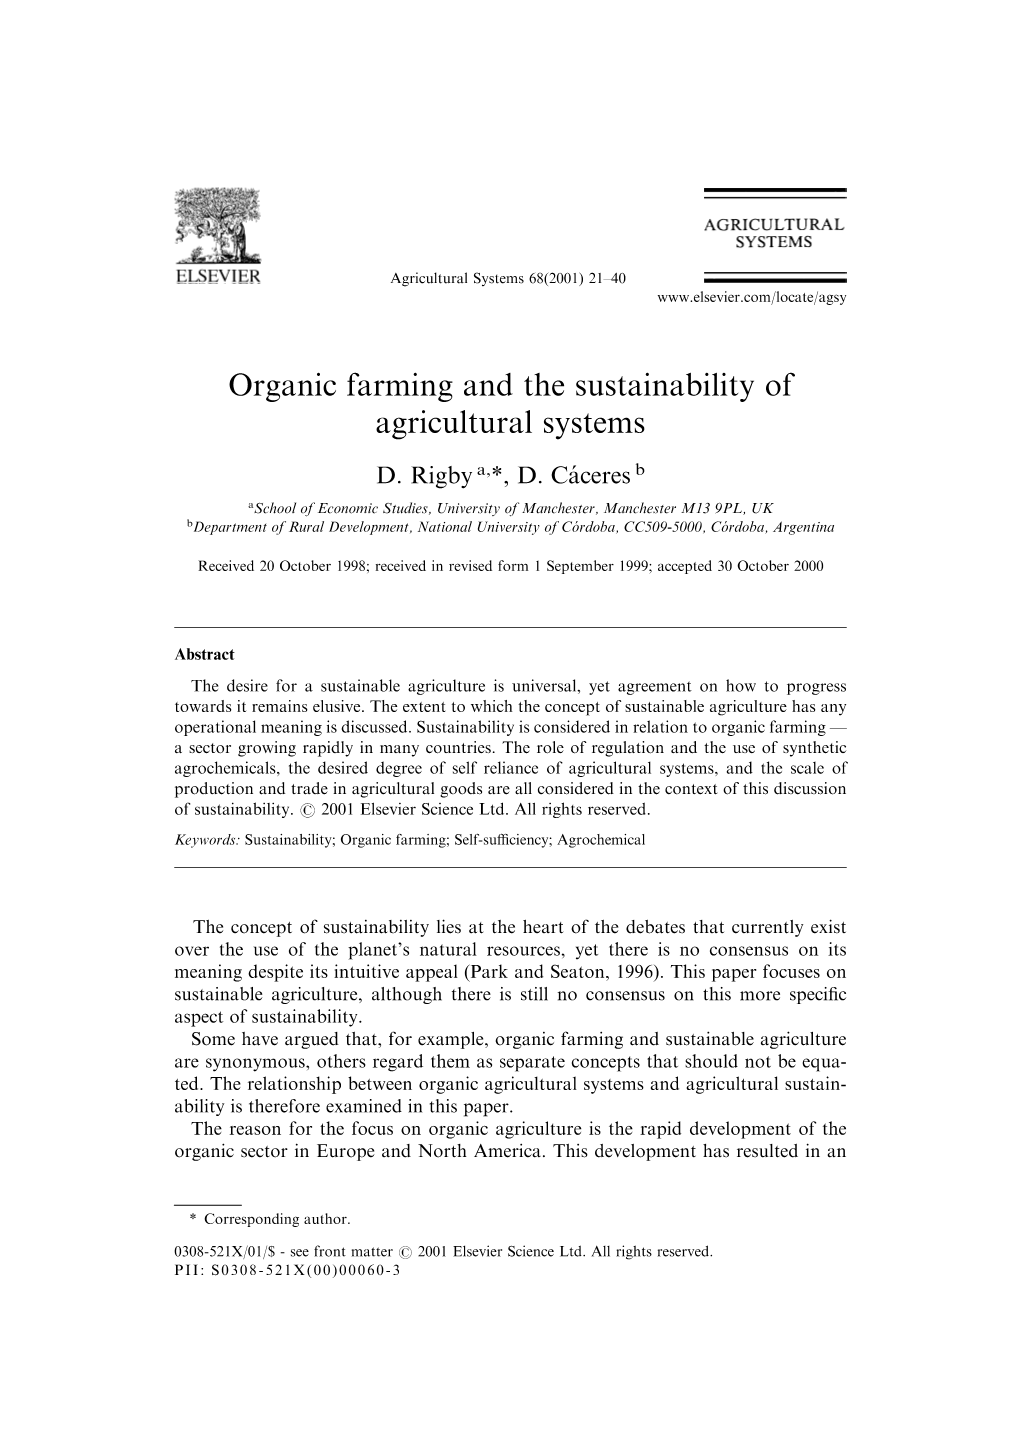 Organic Farming and the Sustainability of Agricultural Systems